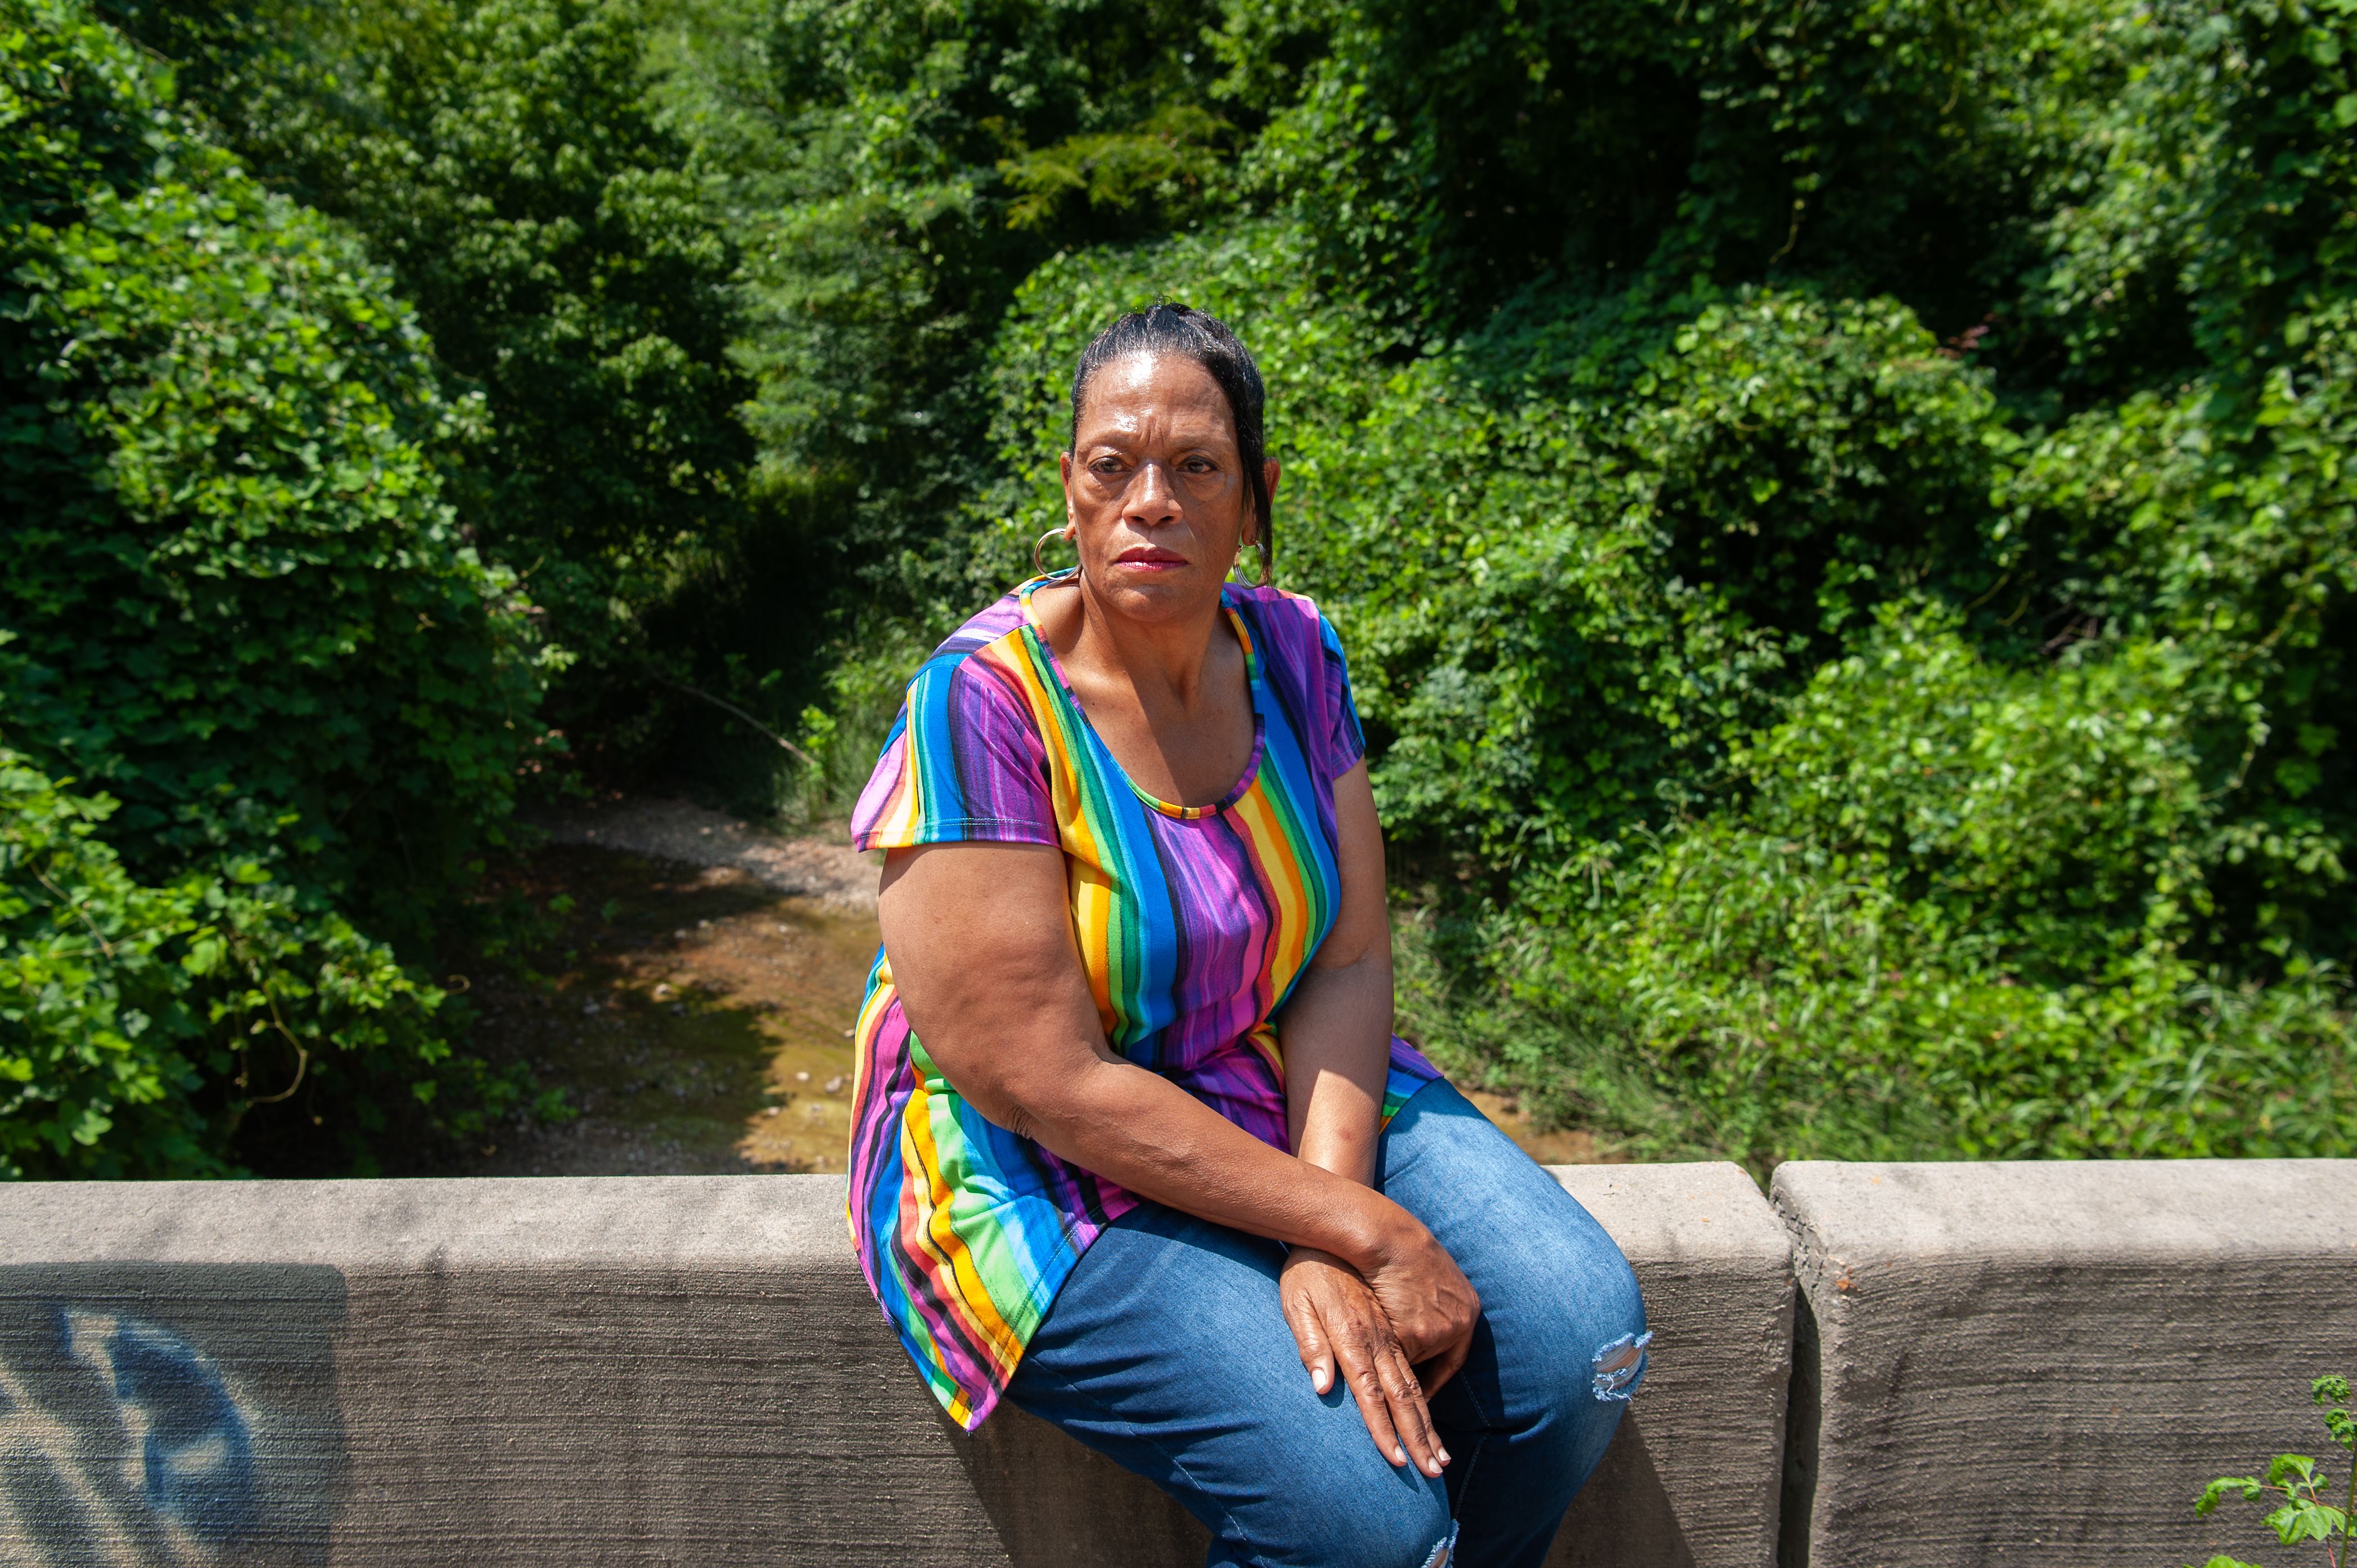 Gas victim Thelma Brown in July, near the site where two of her sons and one of her nephews were rescued in Satartia.<br><strong>Rory Doyle for HuffPost</strong>